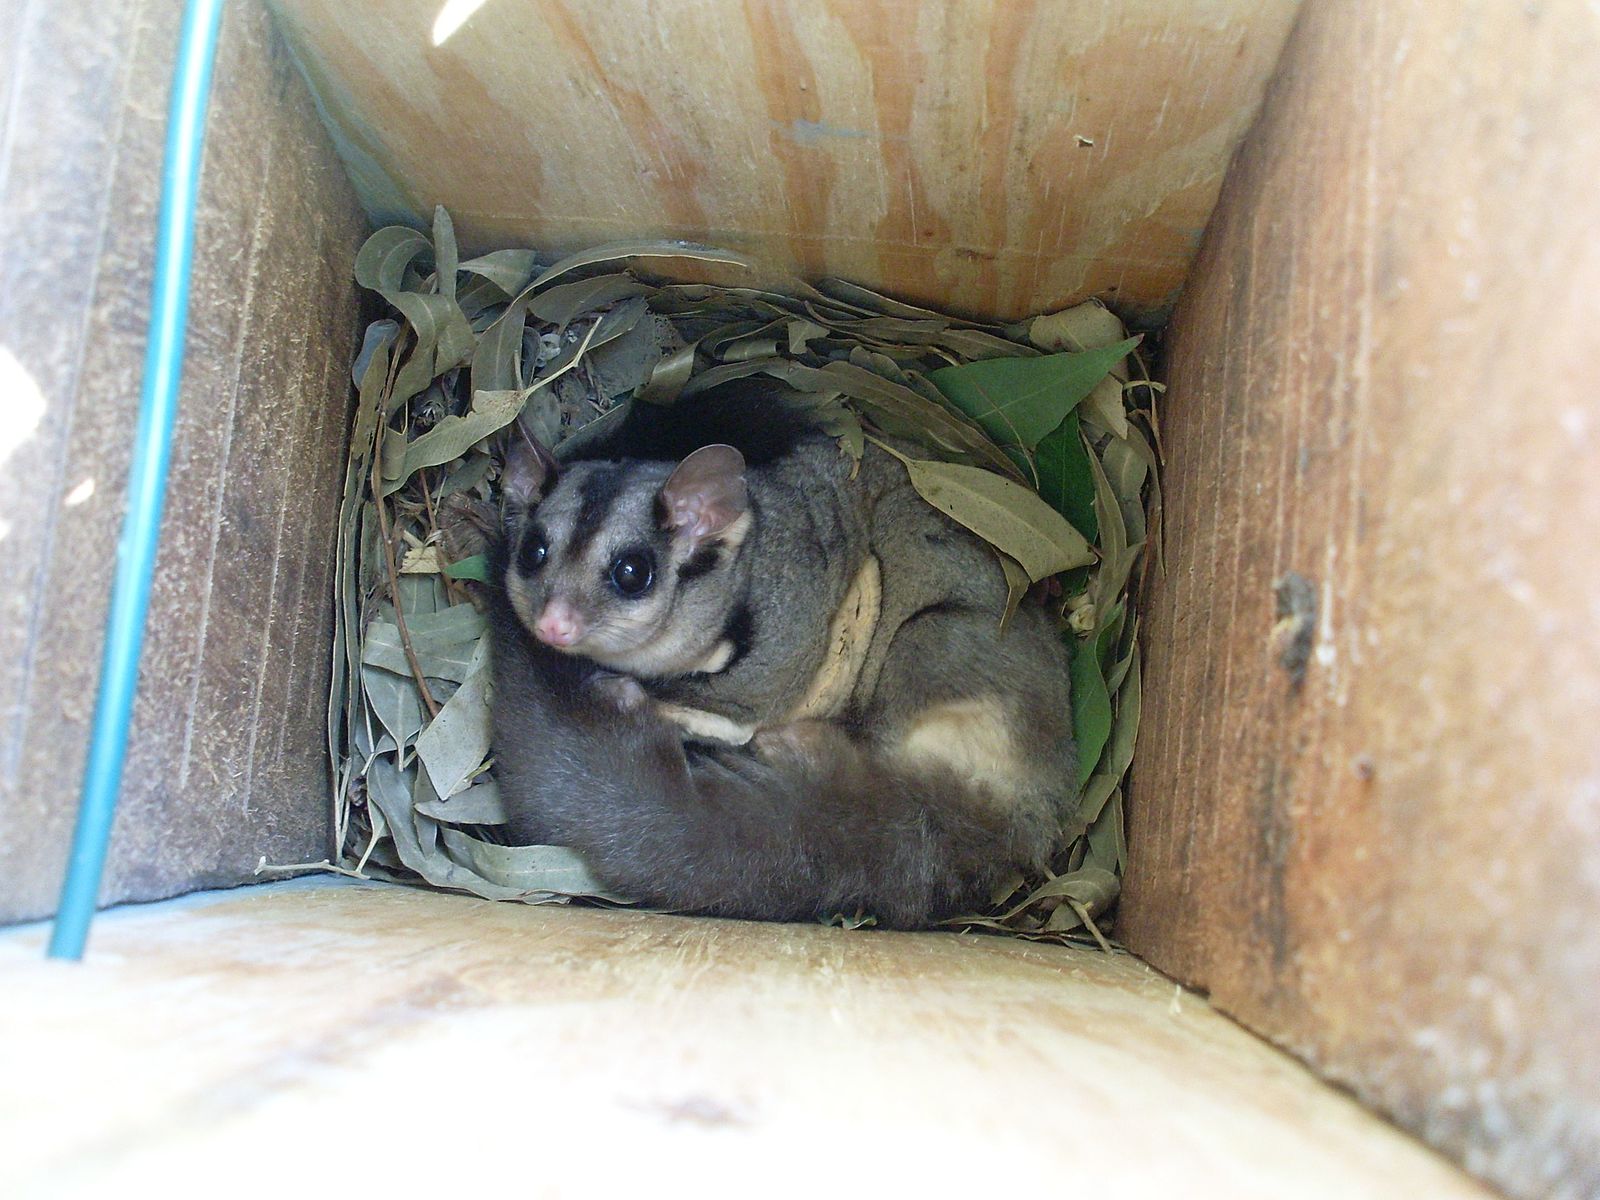 By Brisbane City Council (Squirrel Gliders in Nestbox  Uploaded by russavia) [CC BY 2.0 (http://creativecommons.org/licenses/by/2.0)], via Wikimedia Commons